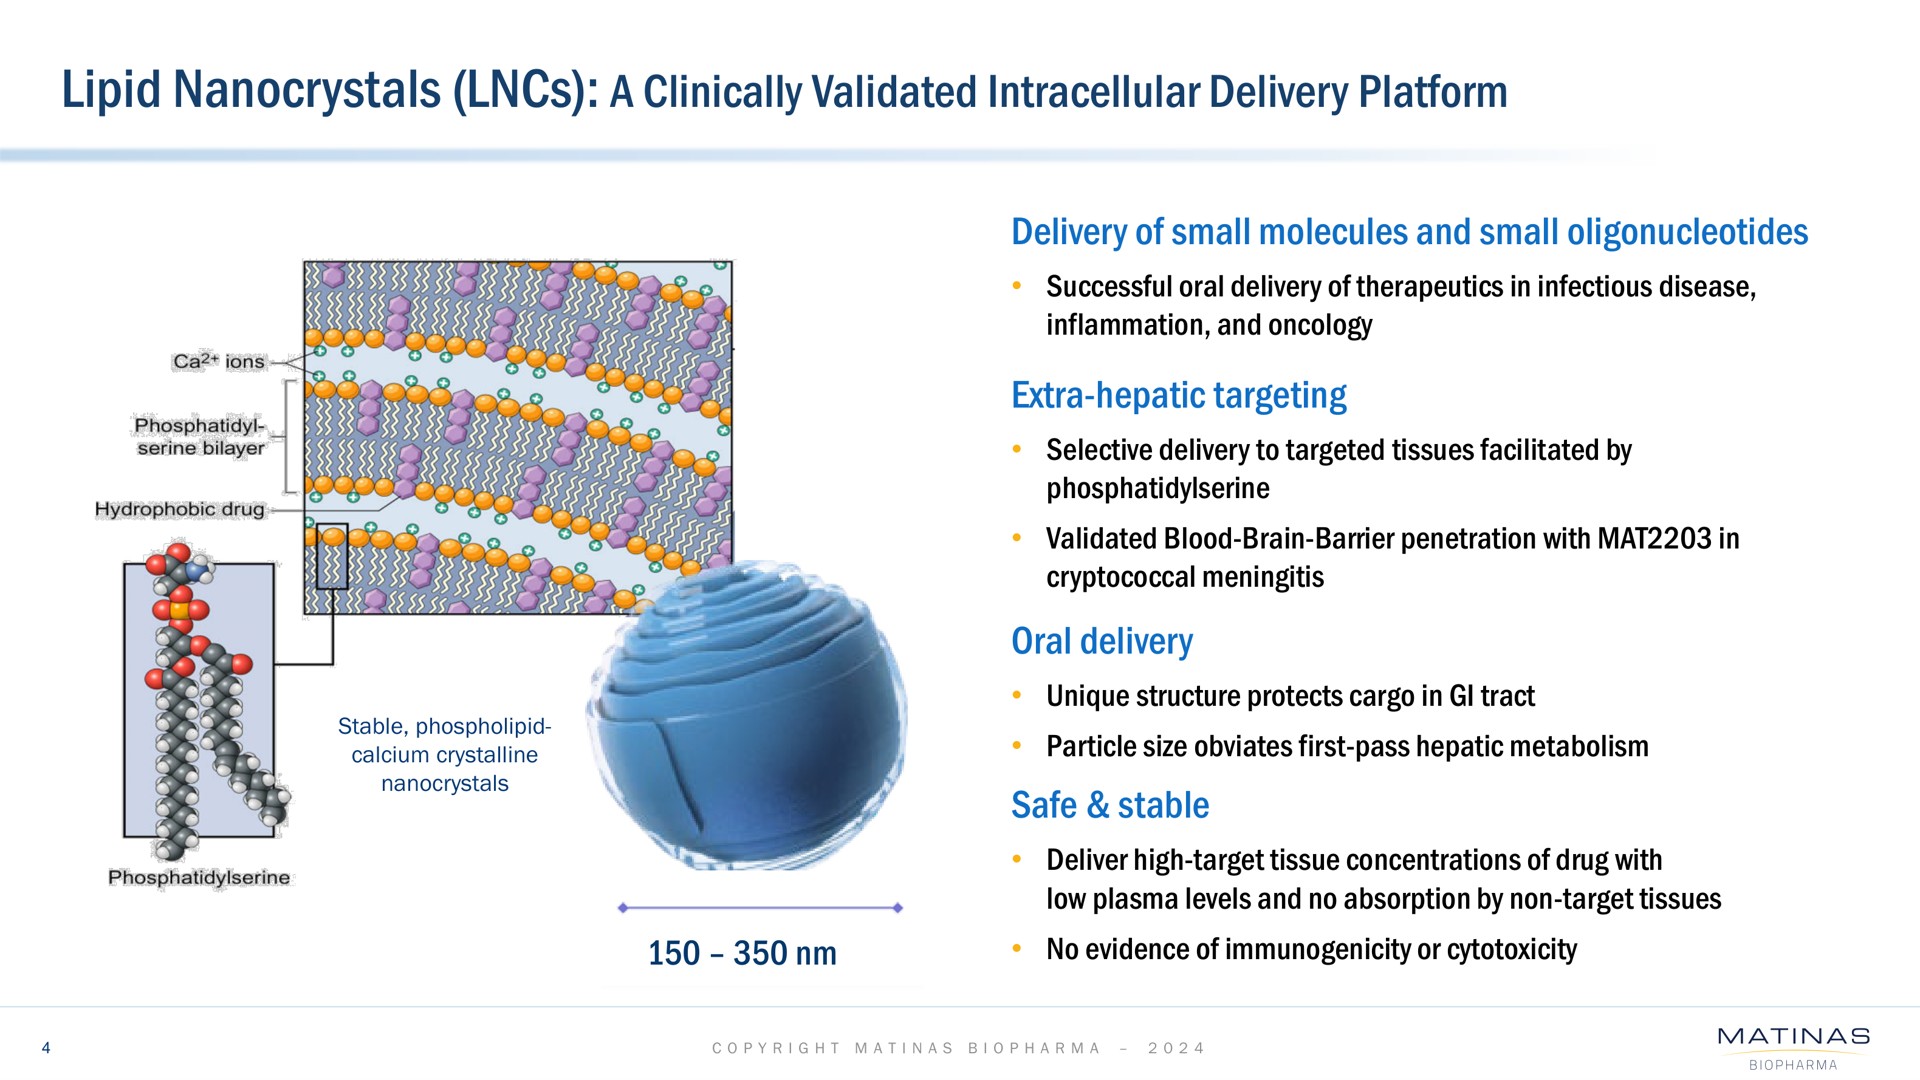 a clinically validated intracellular delivery platform us as tag | Matinas BioPharma